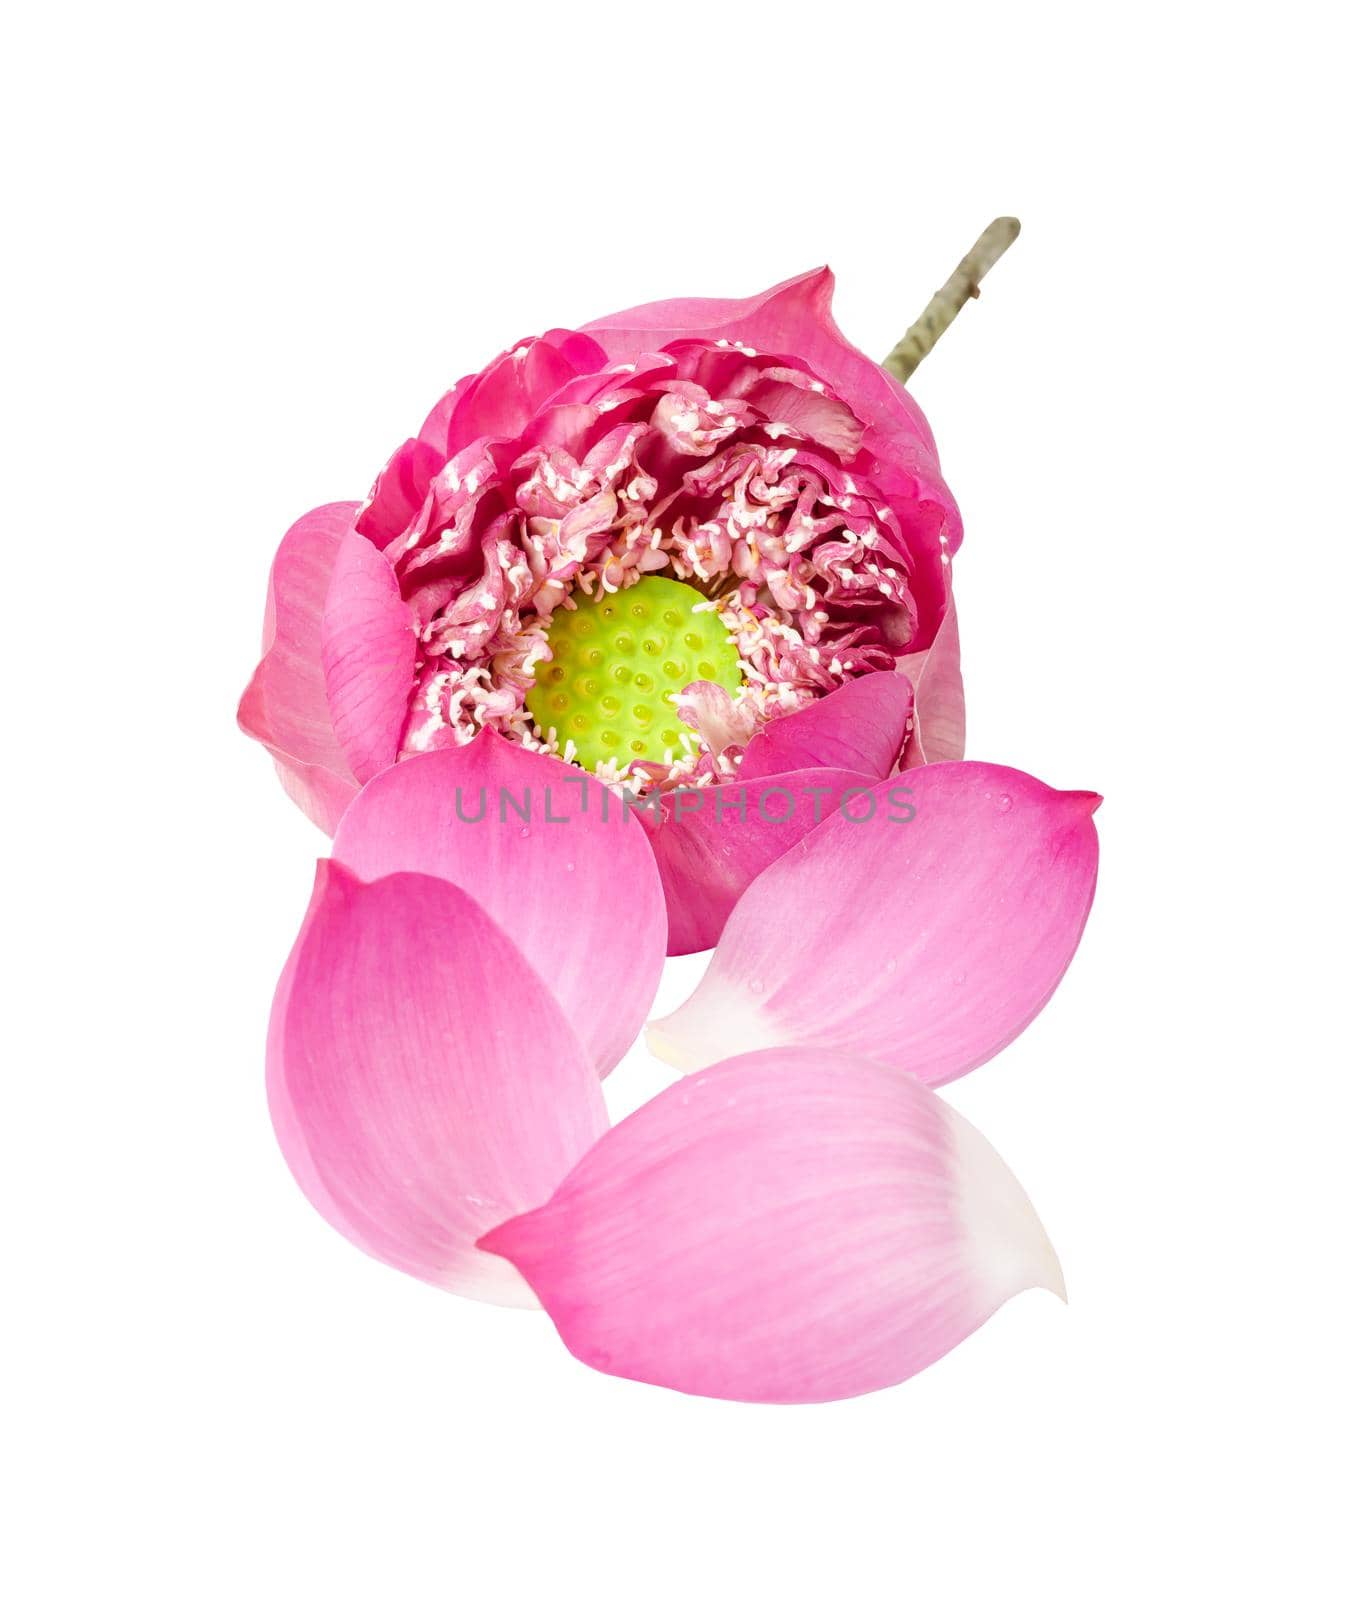 beautiful pink petal lotus flower isolated on white background. by Gamjai